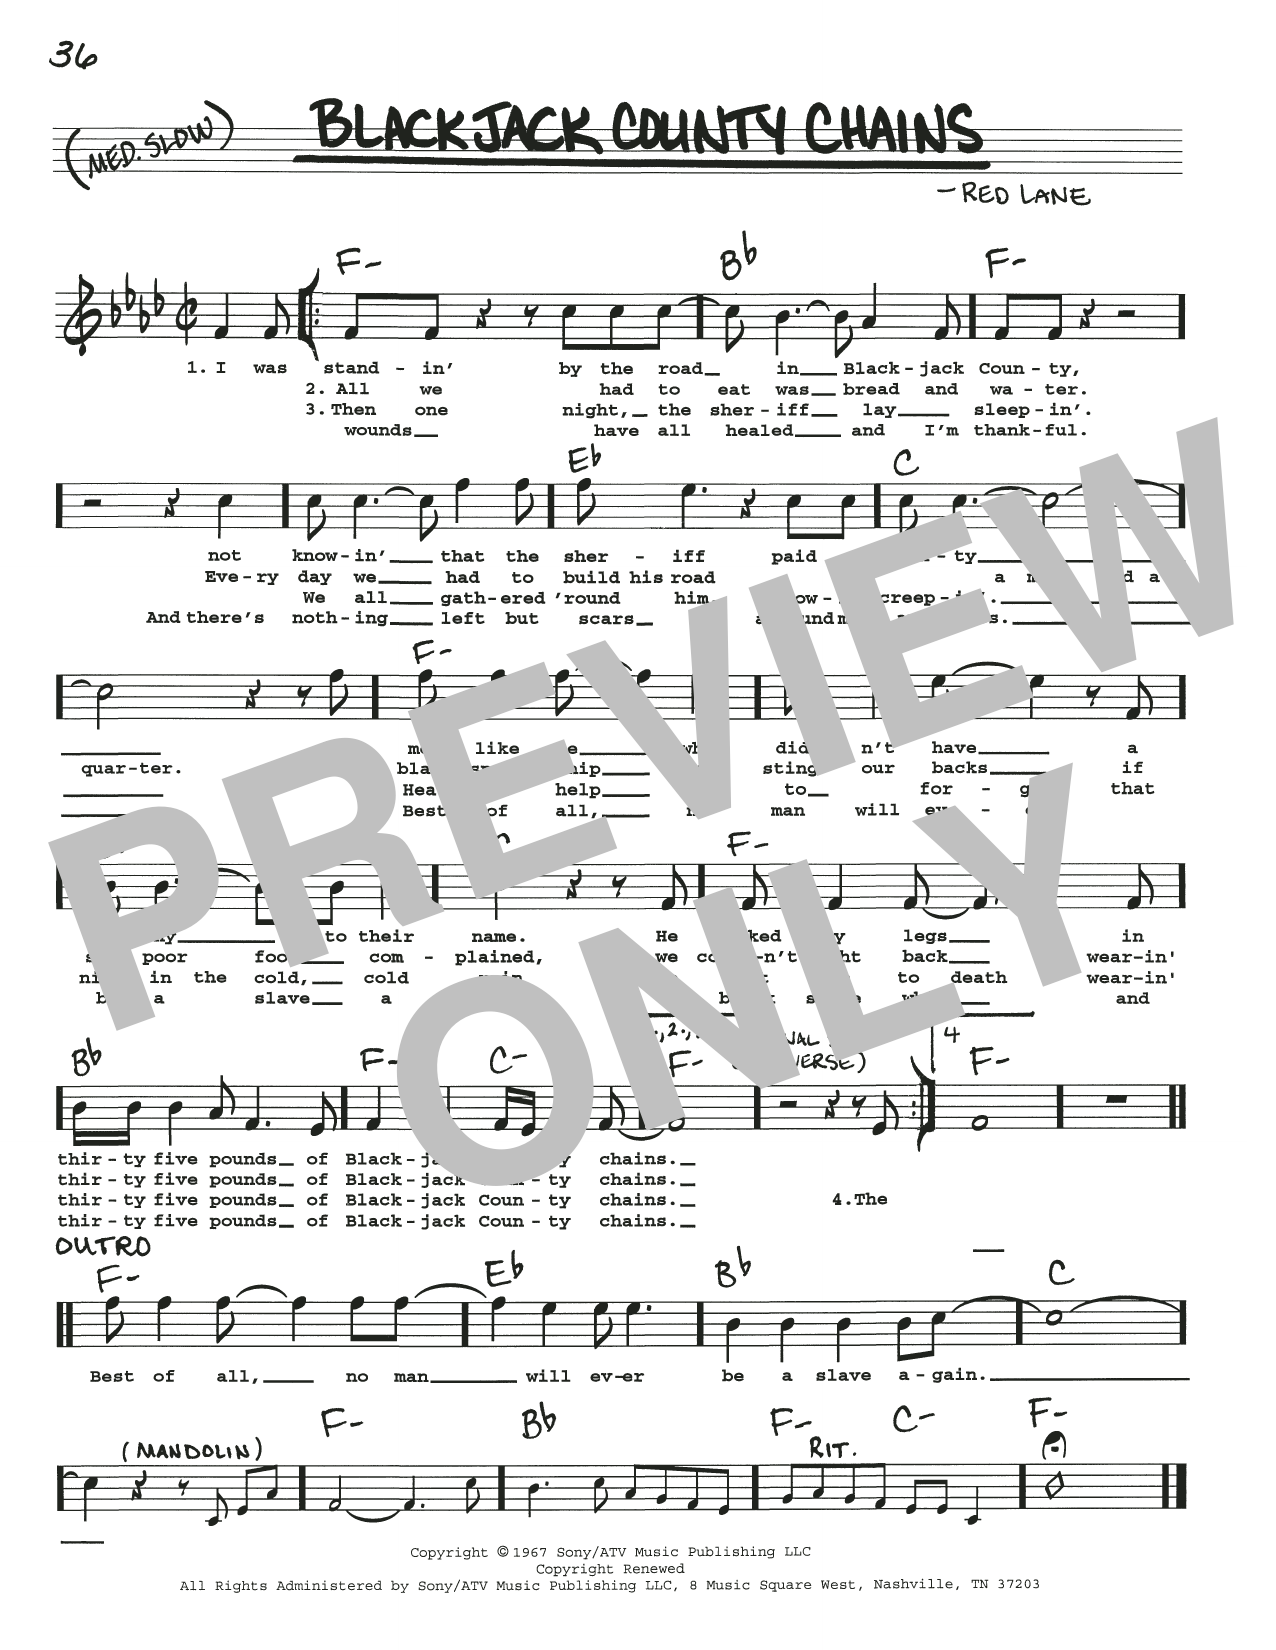 Download Willie Nelson Blackjack County Chains Sheet Music